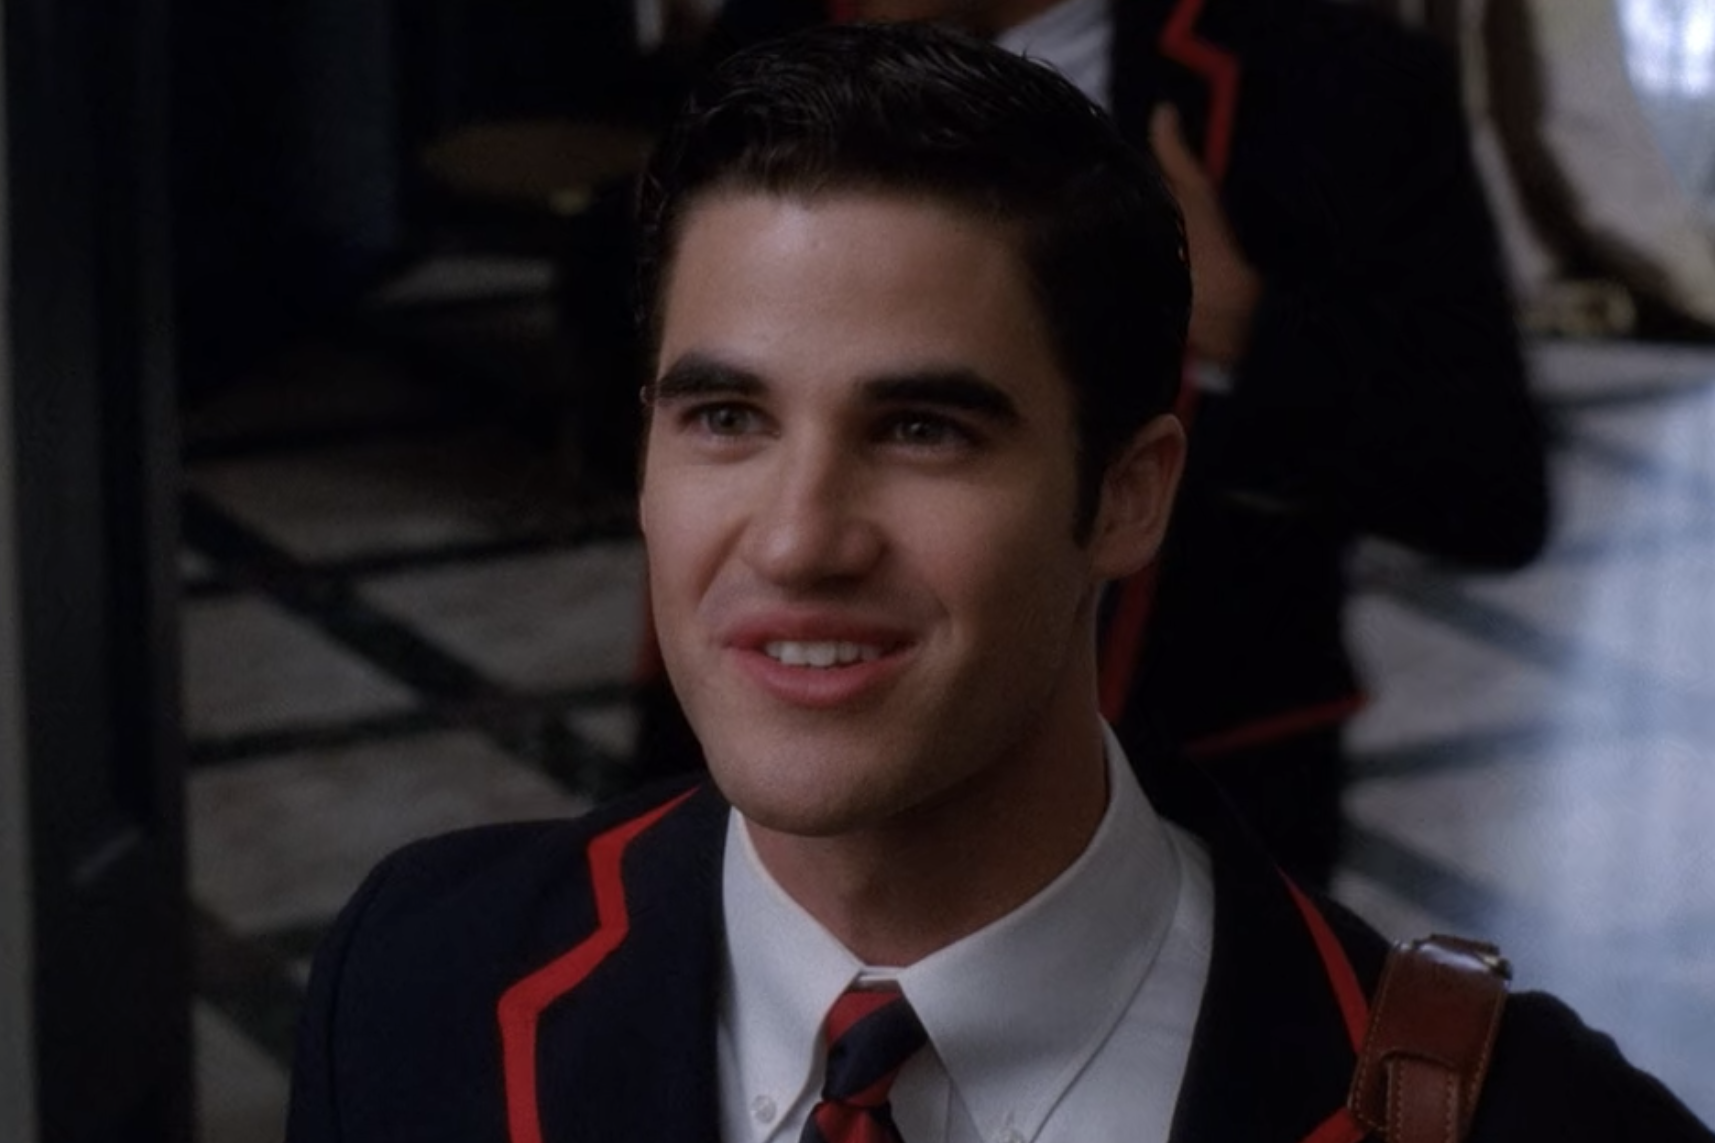 A close up of Blaine Anderson as he wears his blue and red school uniform blazer and smiles up at Kurt Hummel.